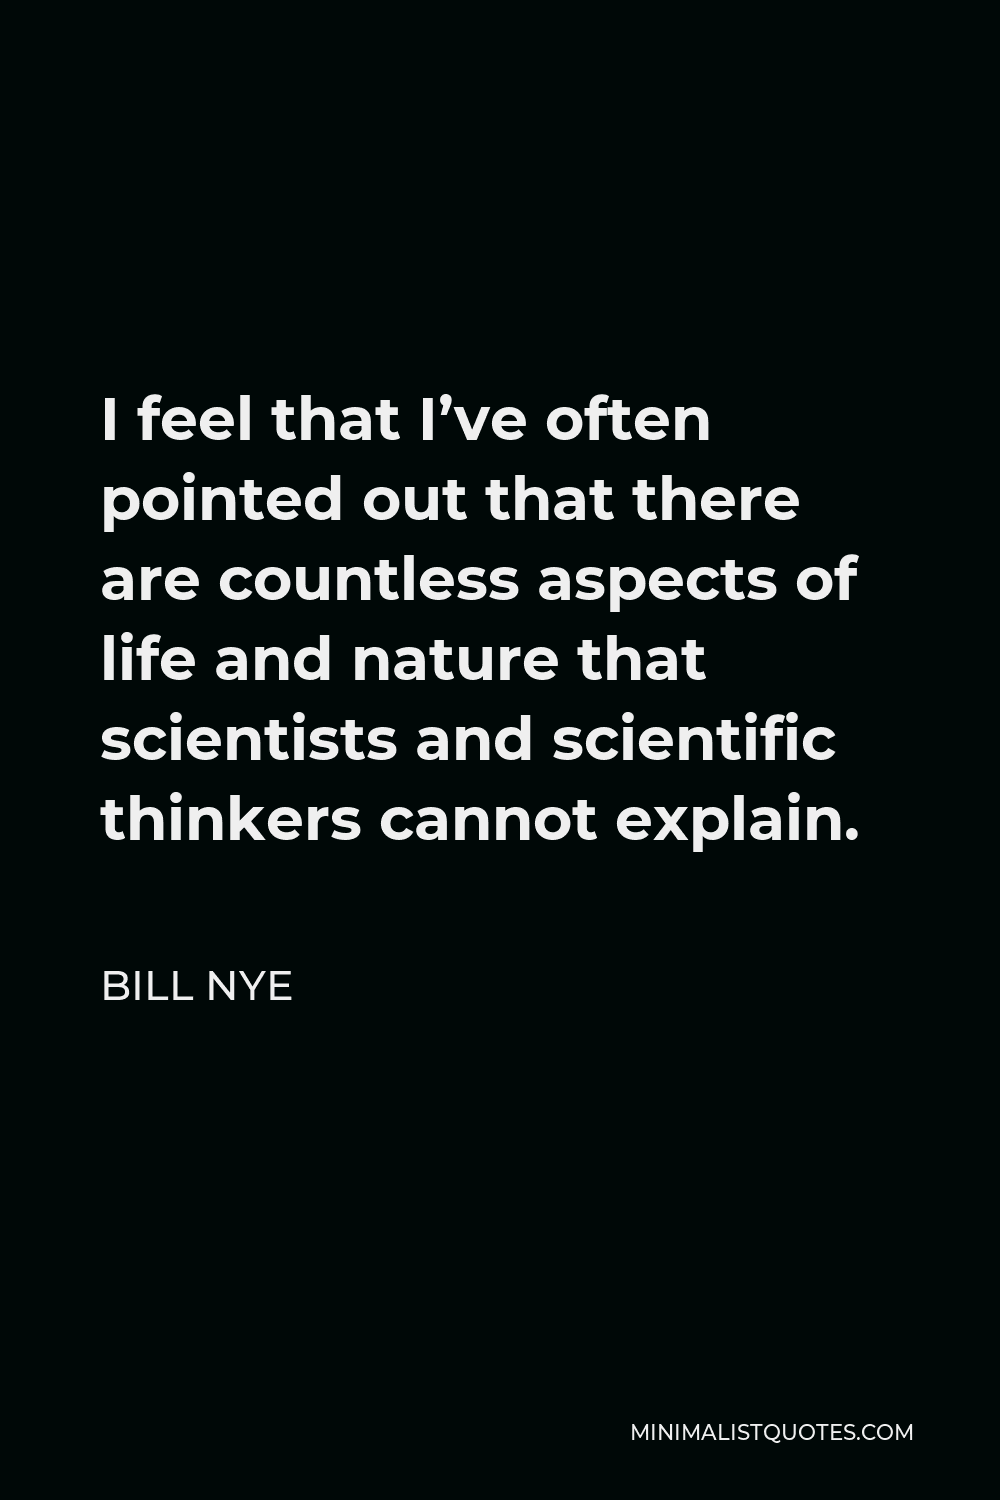 Bill Nye Quote - I feel that I’ve often pointed out that there are countless aspects of life and nature that scientists and scientific thinkers cannot explain.